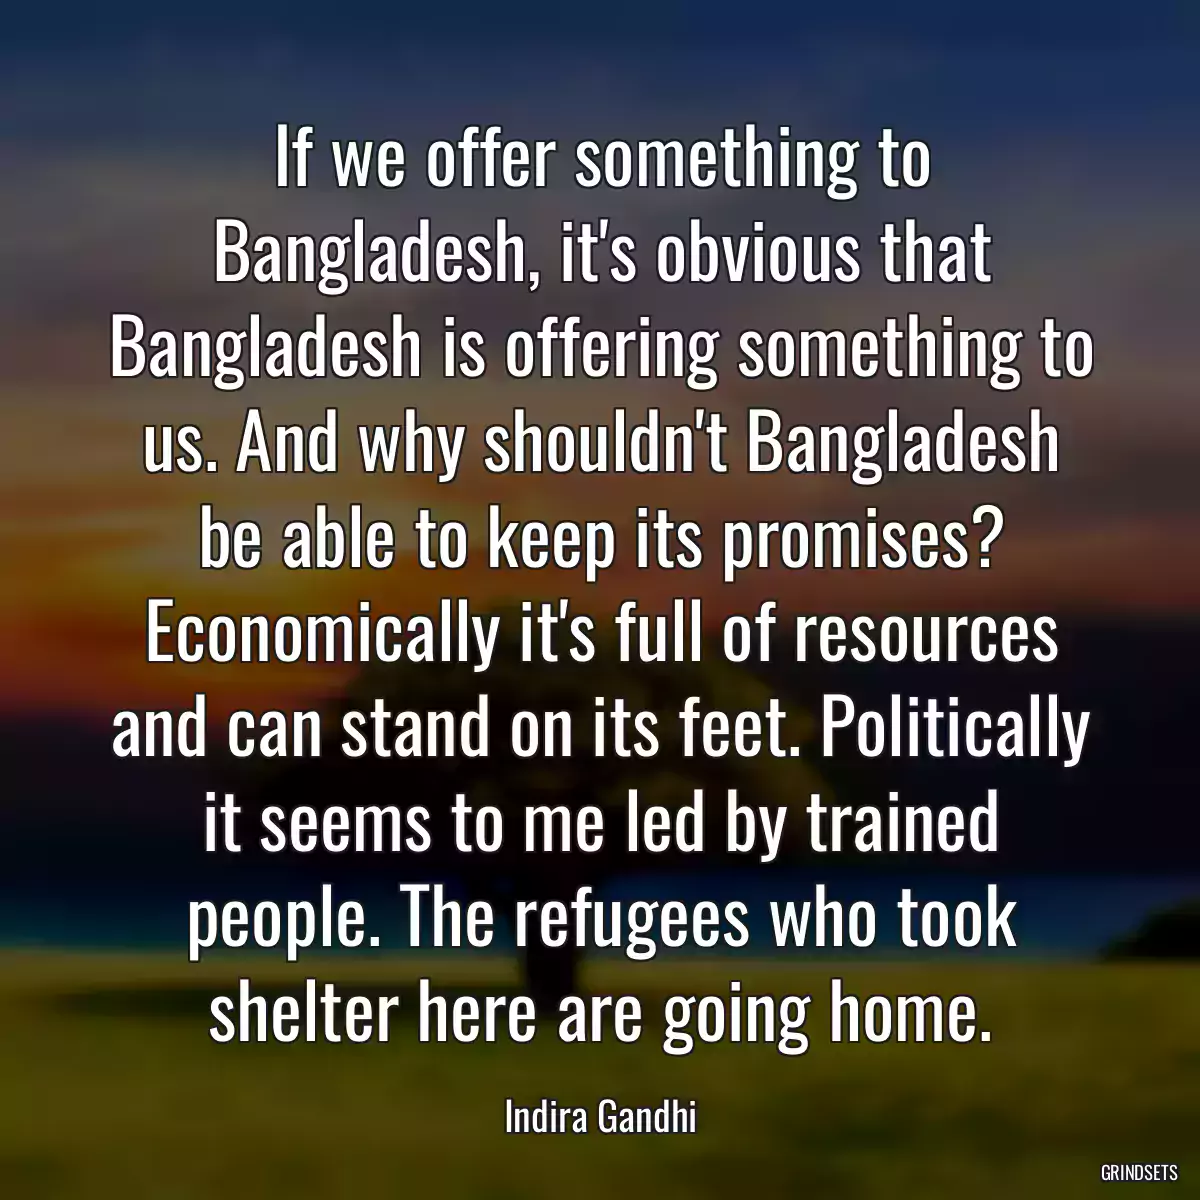 If we offer something to Bangladesh, it\'s obvious that Bangladesh is offering something to us. And why shouldn\'t Bangladesh be able to keep its promises? Economically it\'s full of resources and can stand on its feet. Politically it seems to me led by trained people. The refugees who took shelter here are going home.